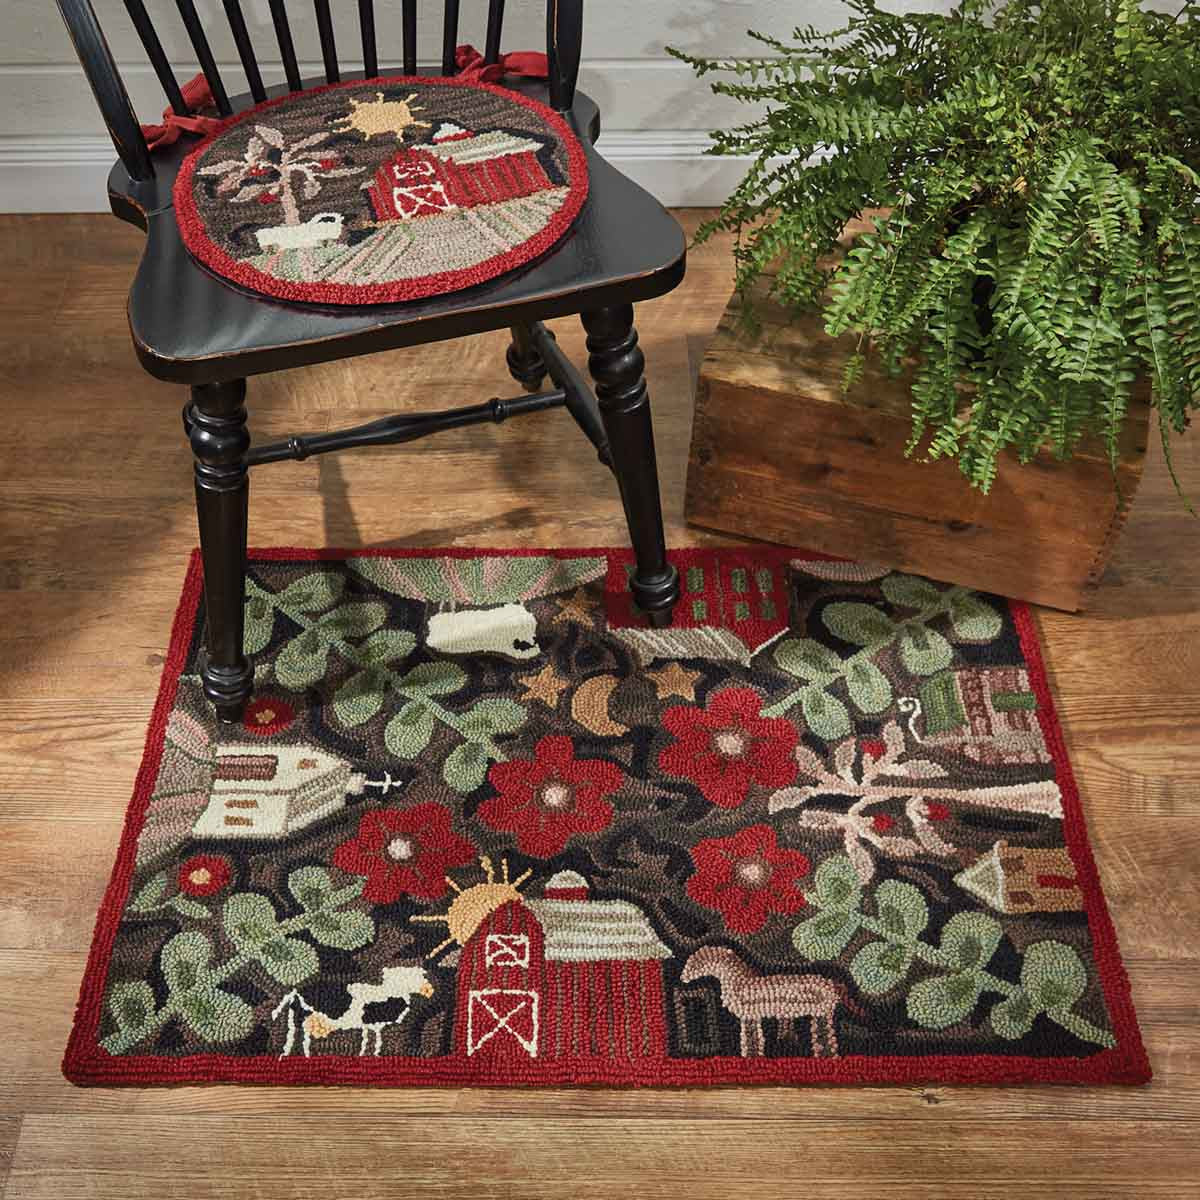 Farm Life Hooked Rug 2' x 3' Handcrafted Area Rug - SPECIAL OFFER SPEND $200 AND GET 20% OFF